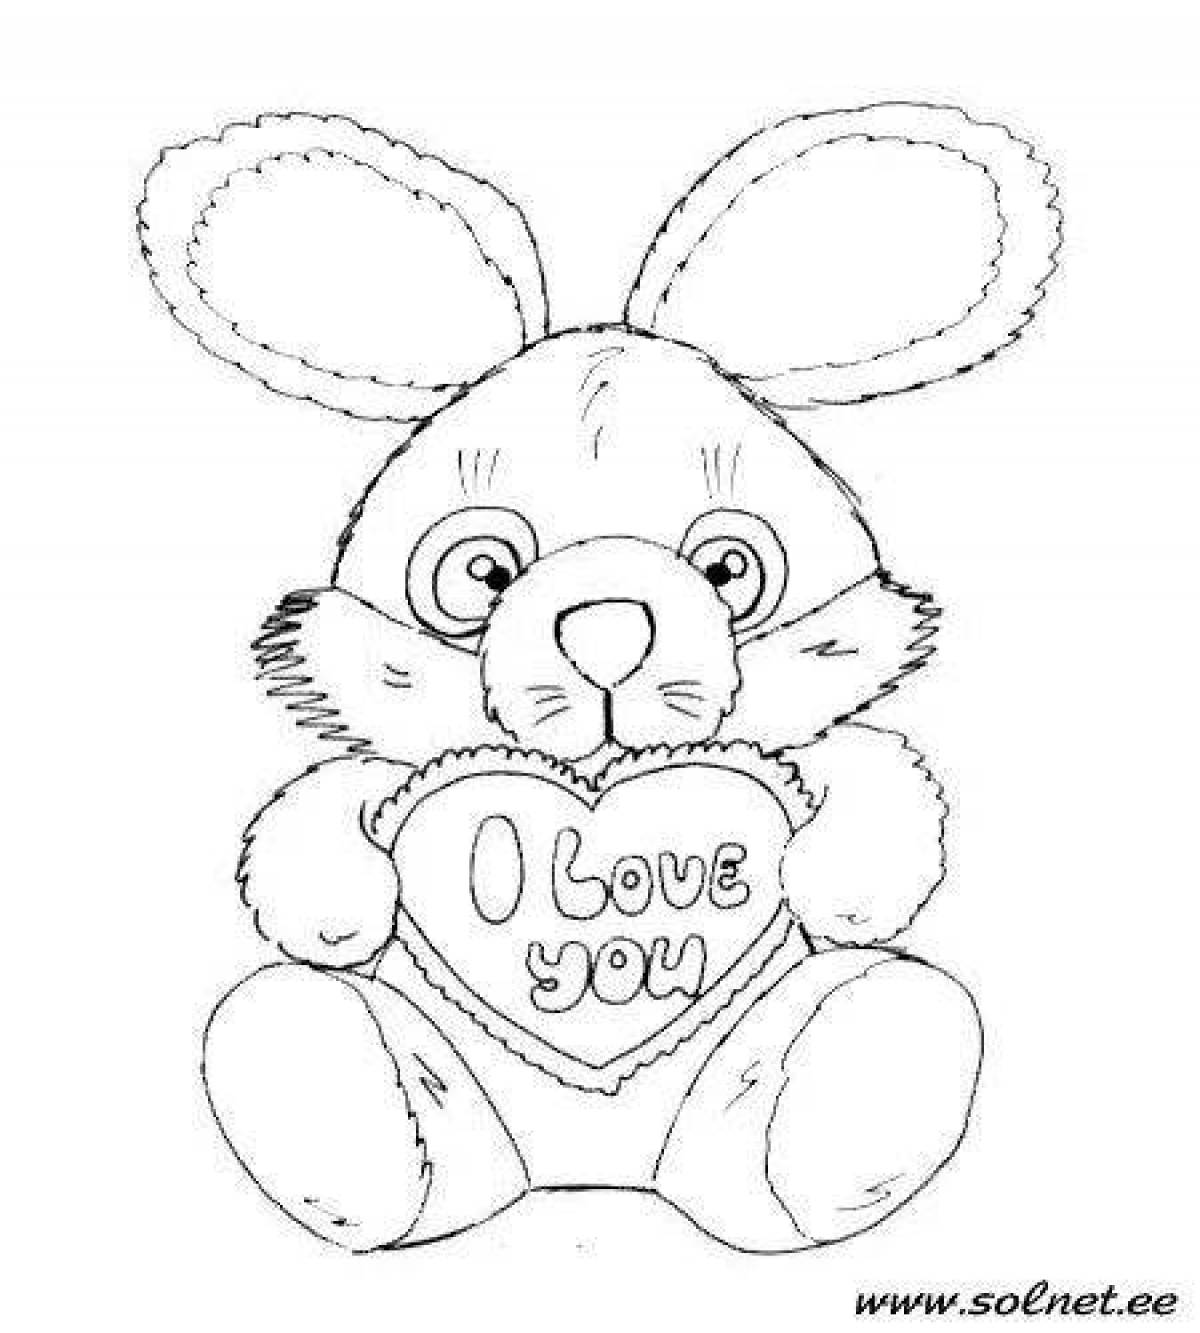 Naughty bunny coloring book with heart